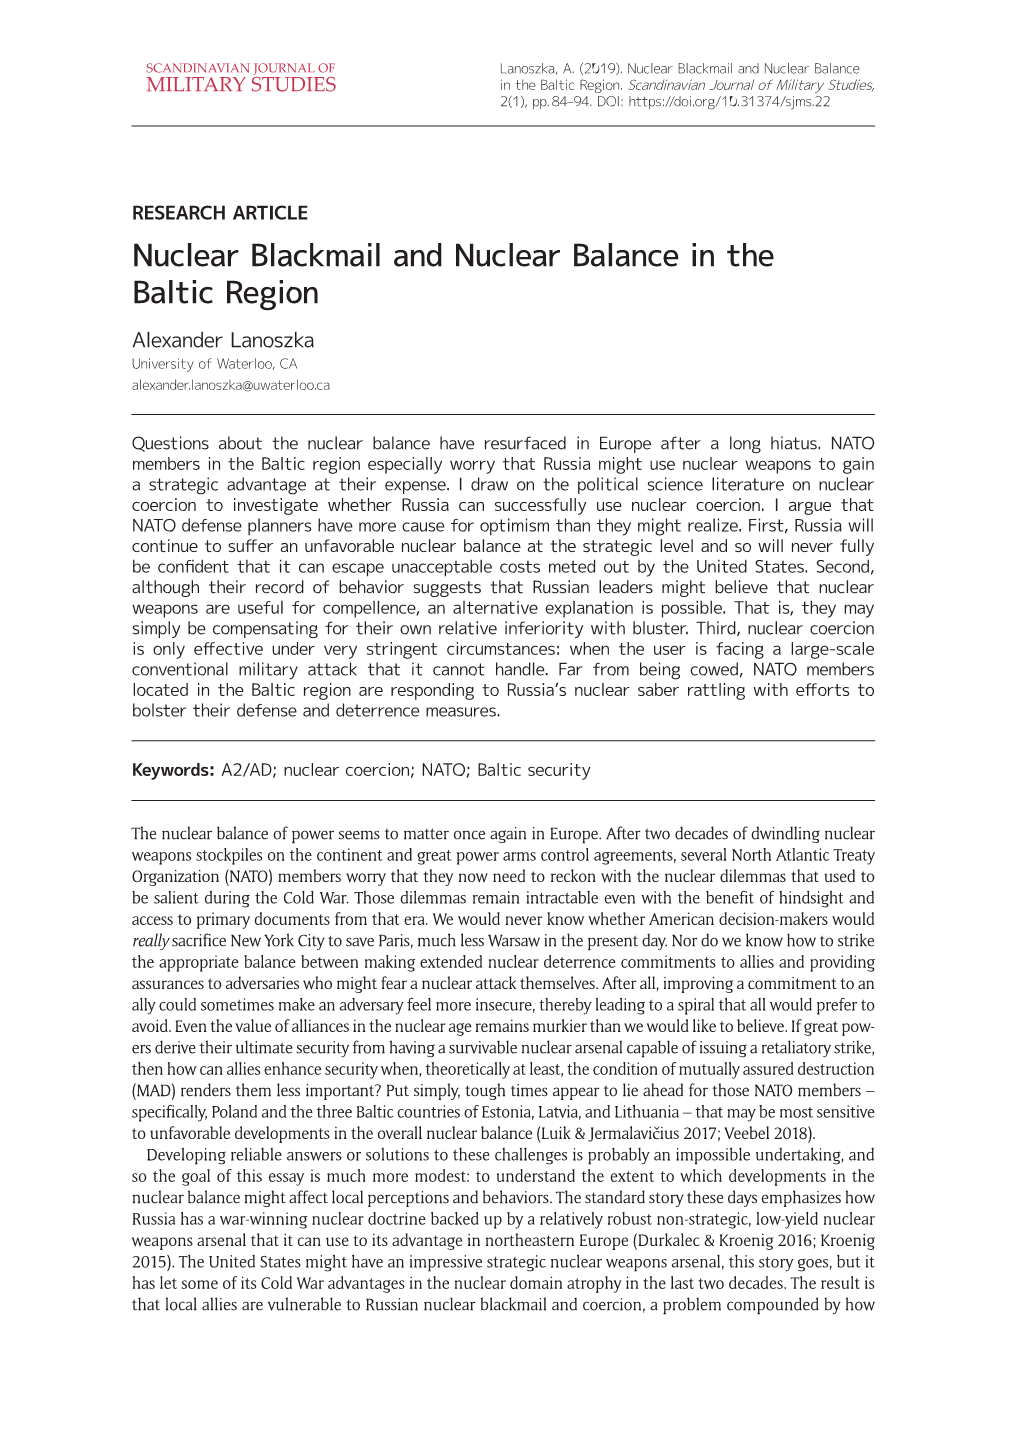 Nuclear Blackmail and Nuclear Balance in the Baltic Region Alexander Lanoszka University of Waterloo, CA Alexander.Lanoszka@Uwaterloo.Ca